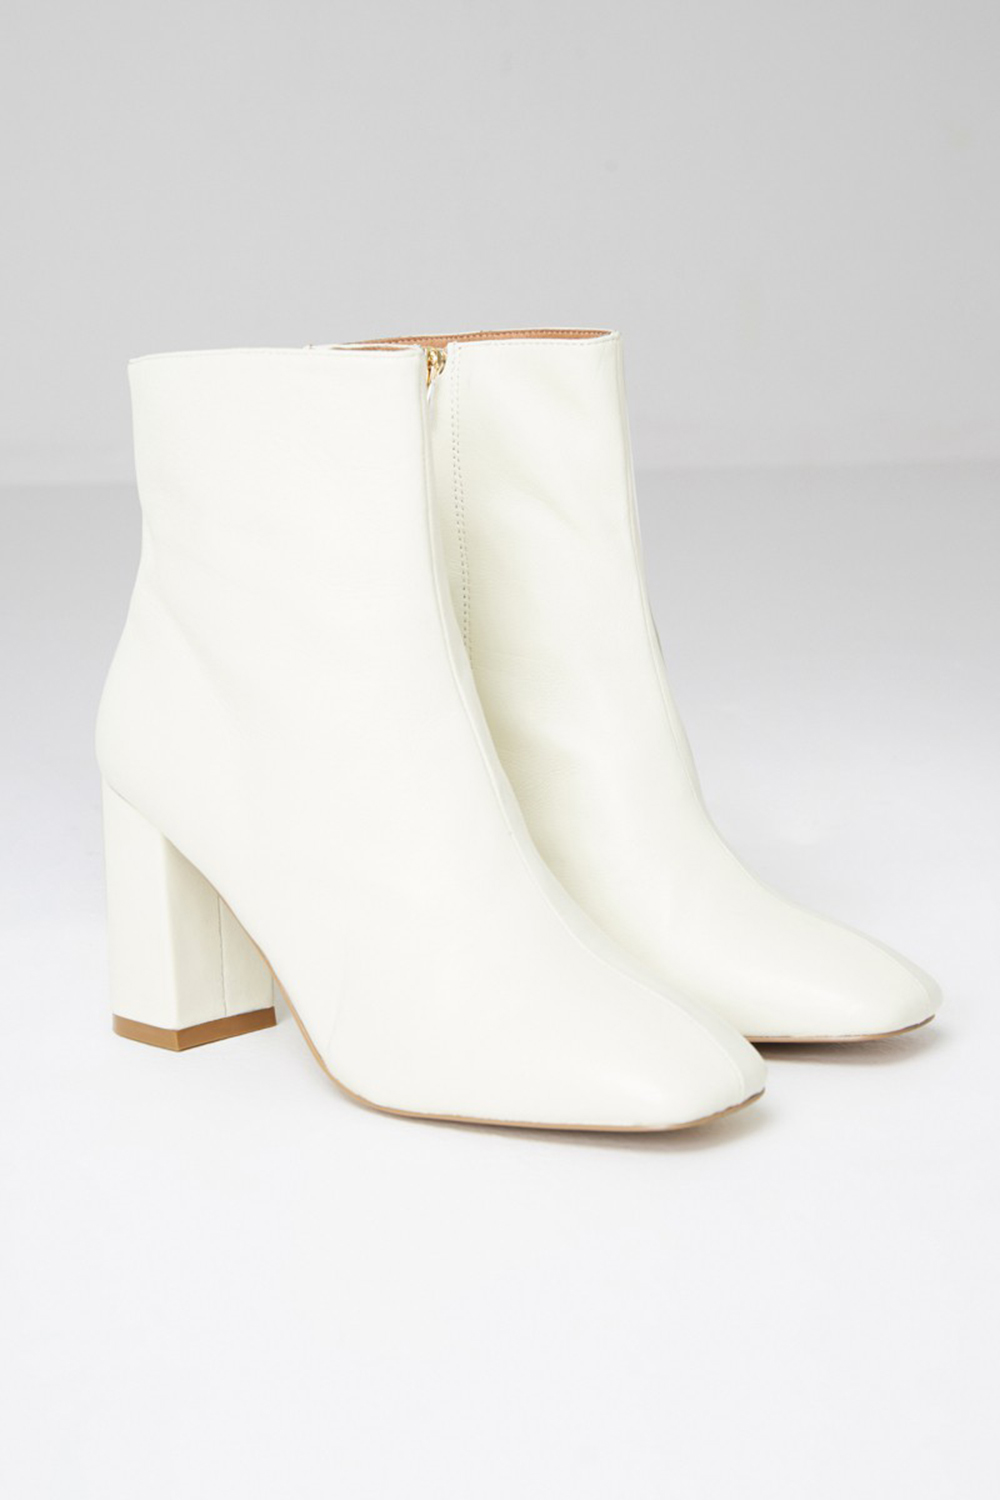 Jagger boots, $320 from BNKR